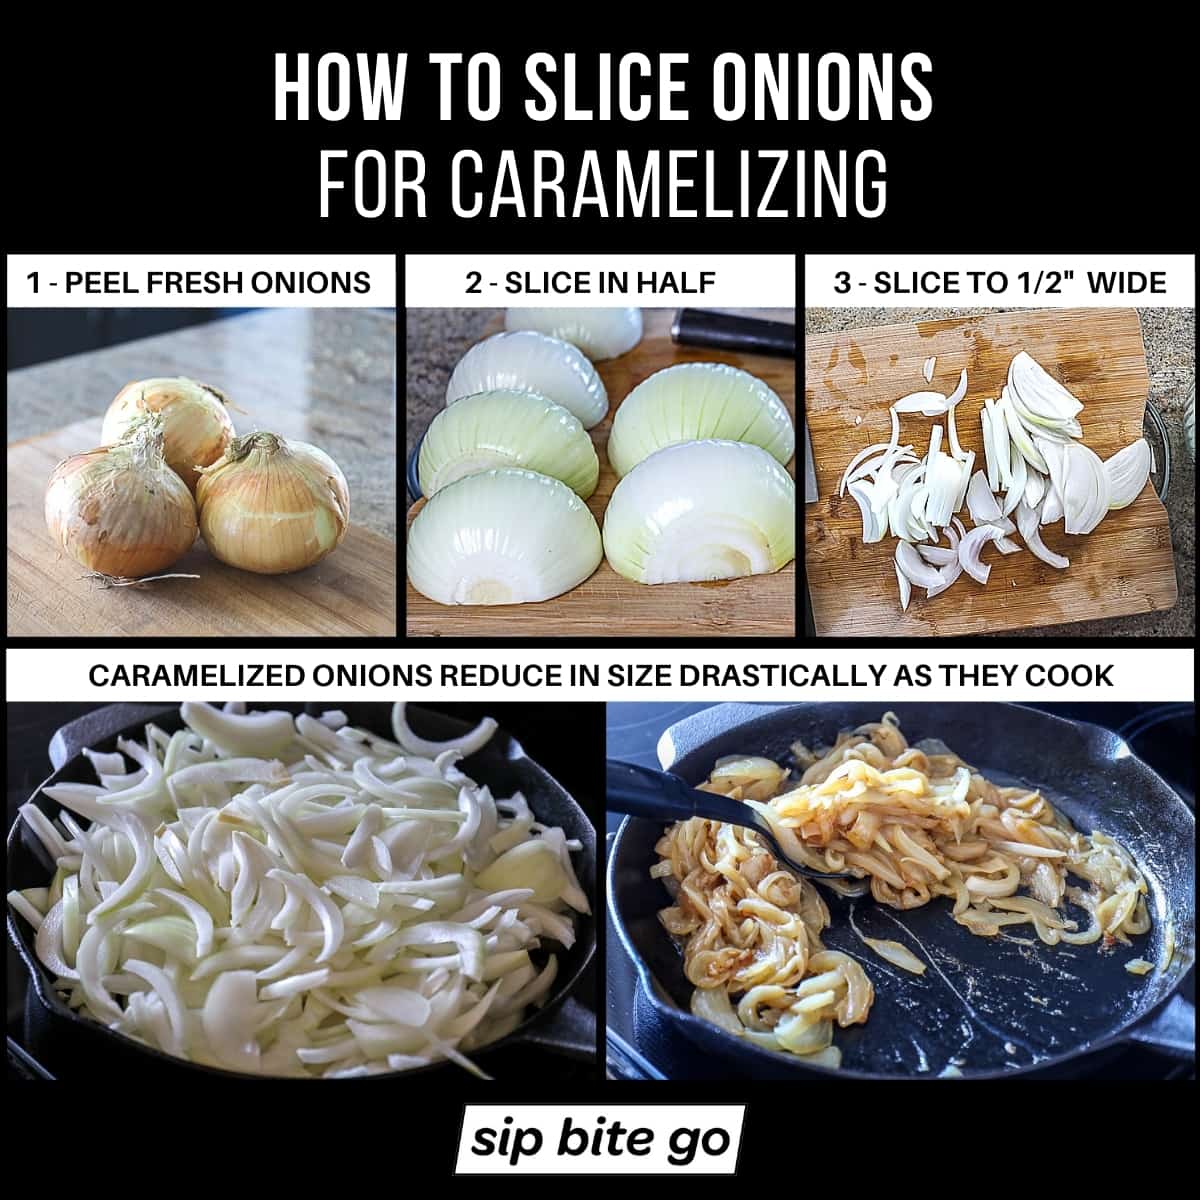 Infographic chart with steps demonstrating how to slice onions for caramelizing.